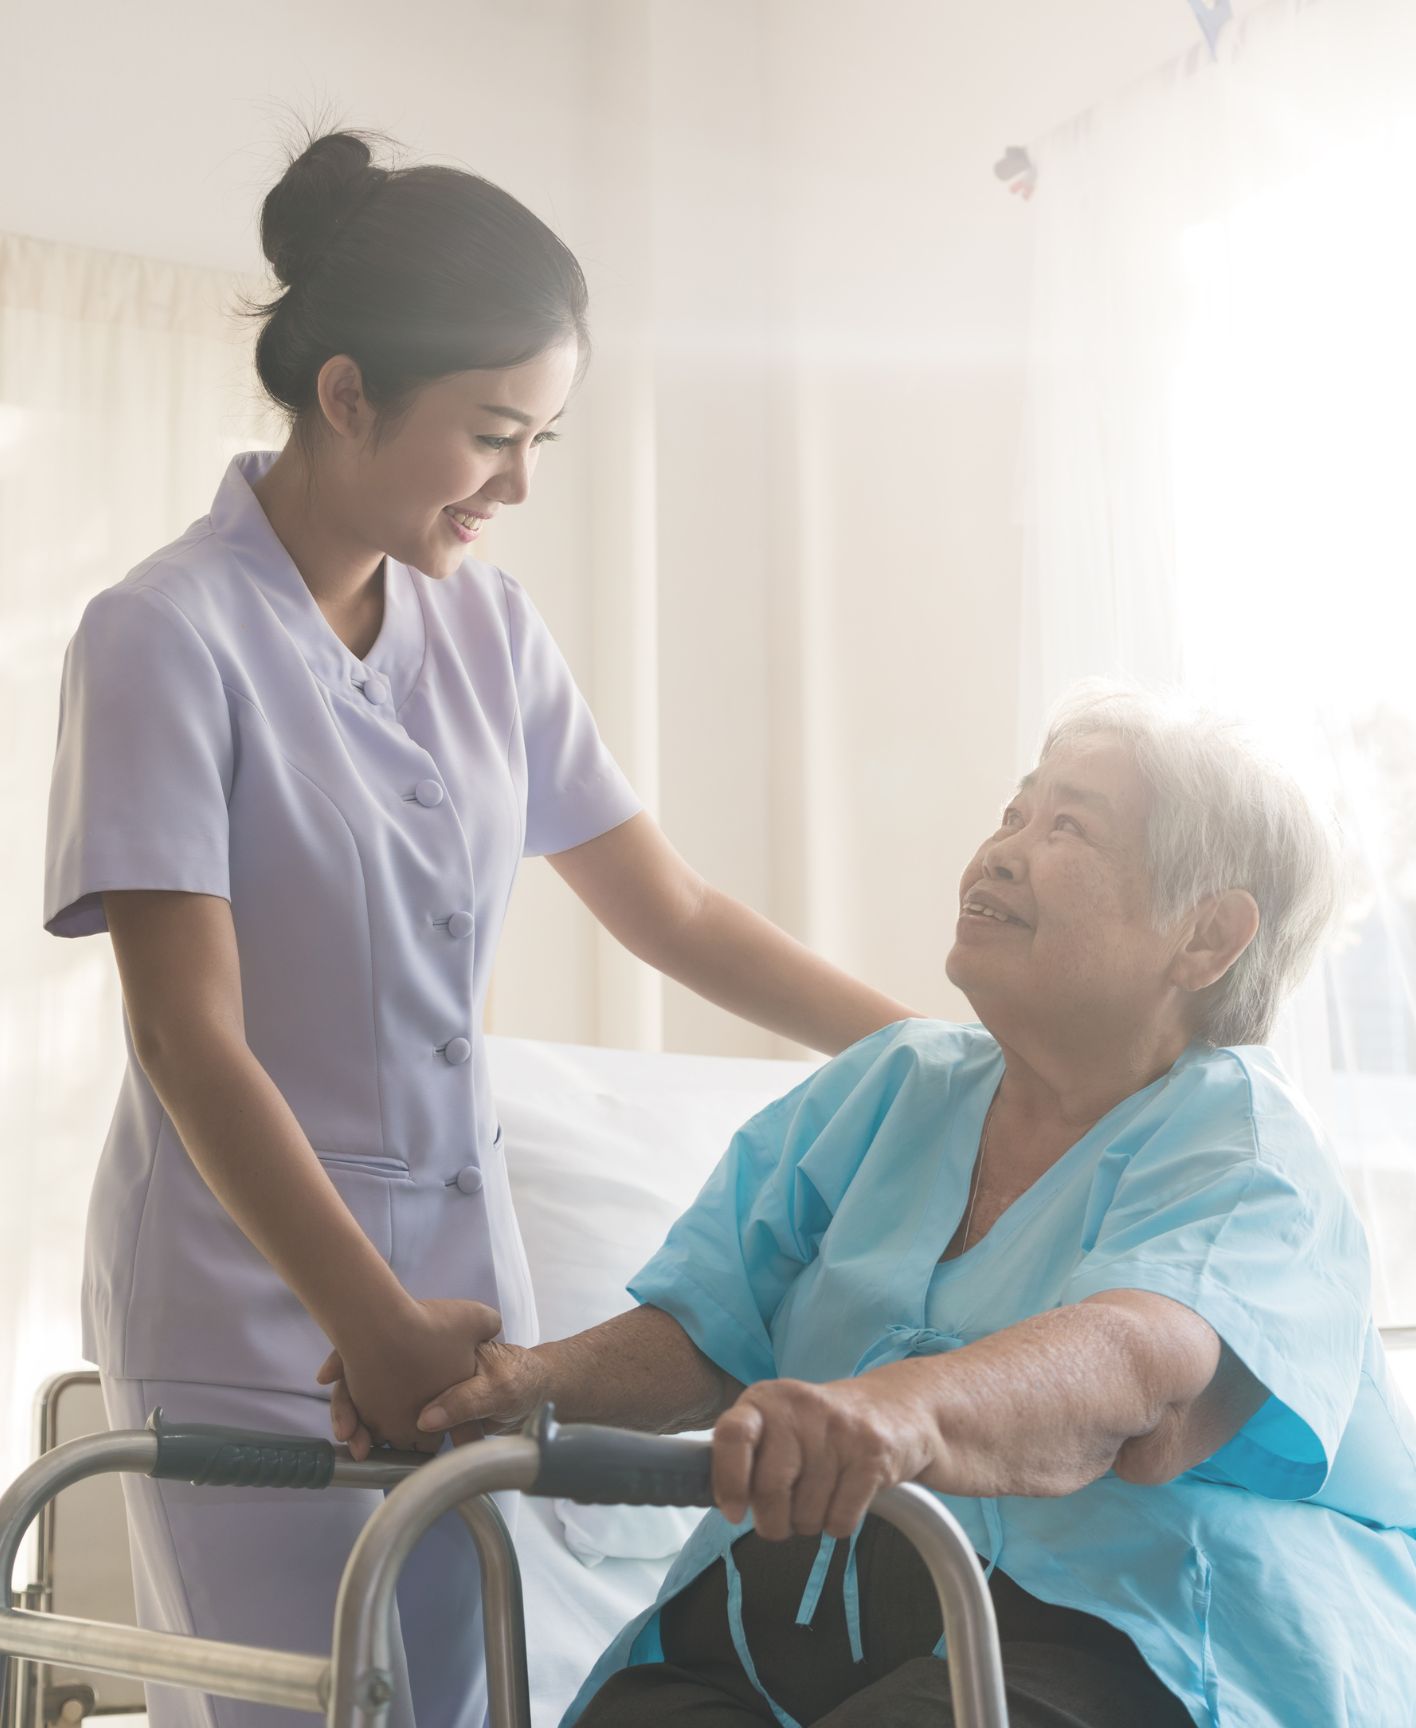 We can reduce hospital readmissions and improve patient outcomes through non-medical in-home care services